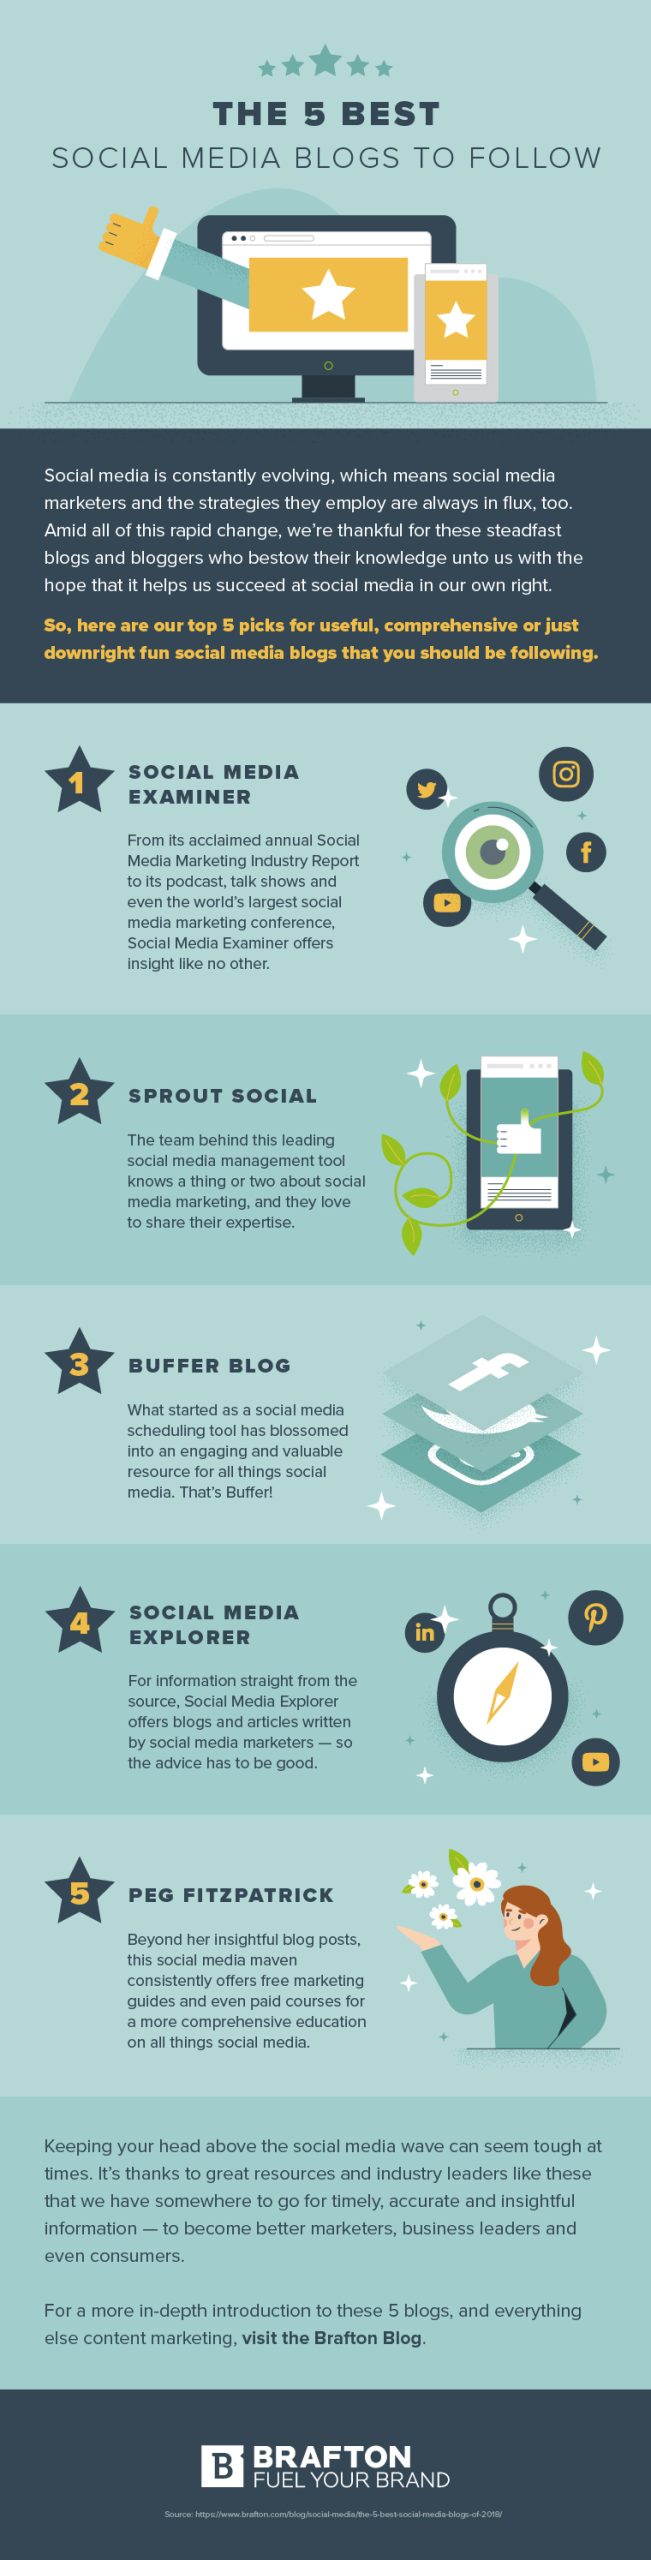 The 5 best social media blogs to follow